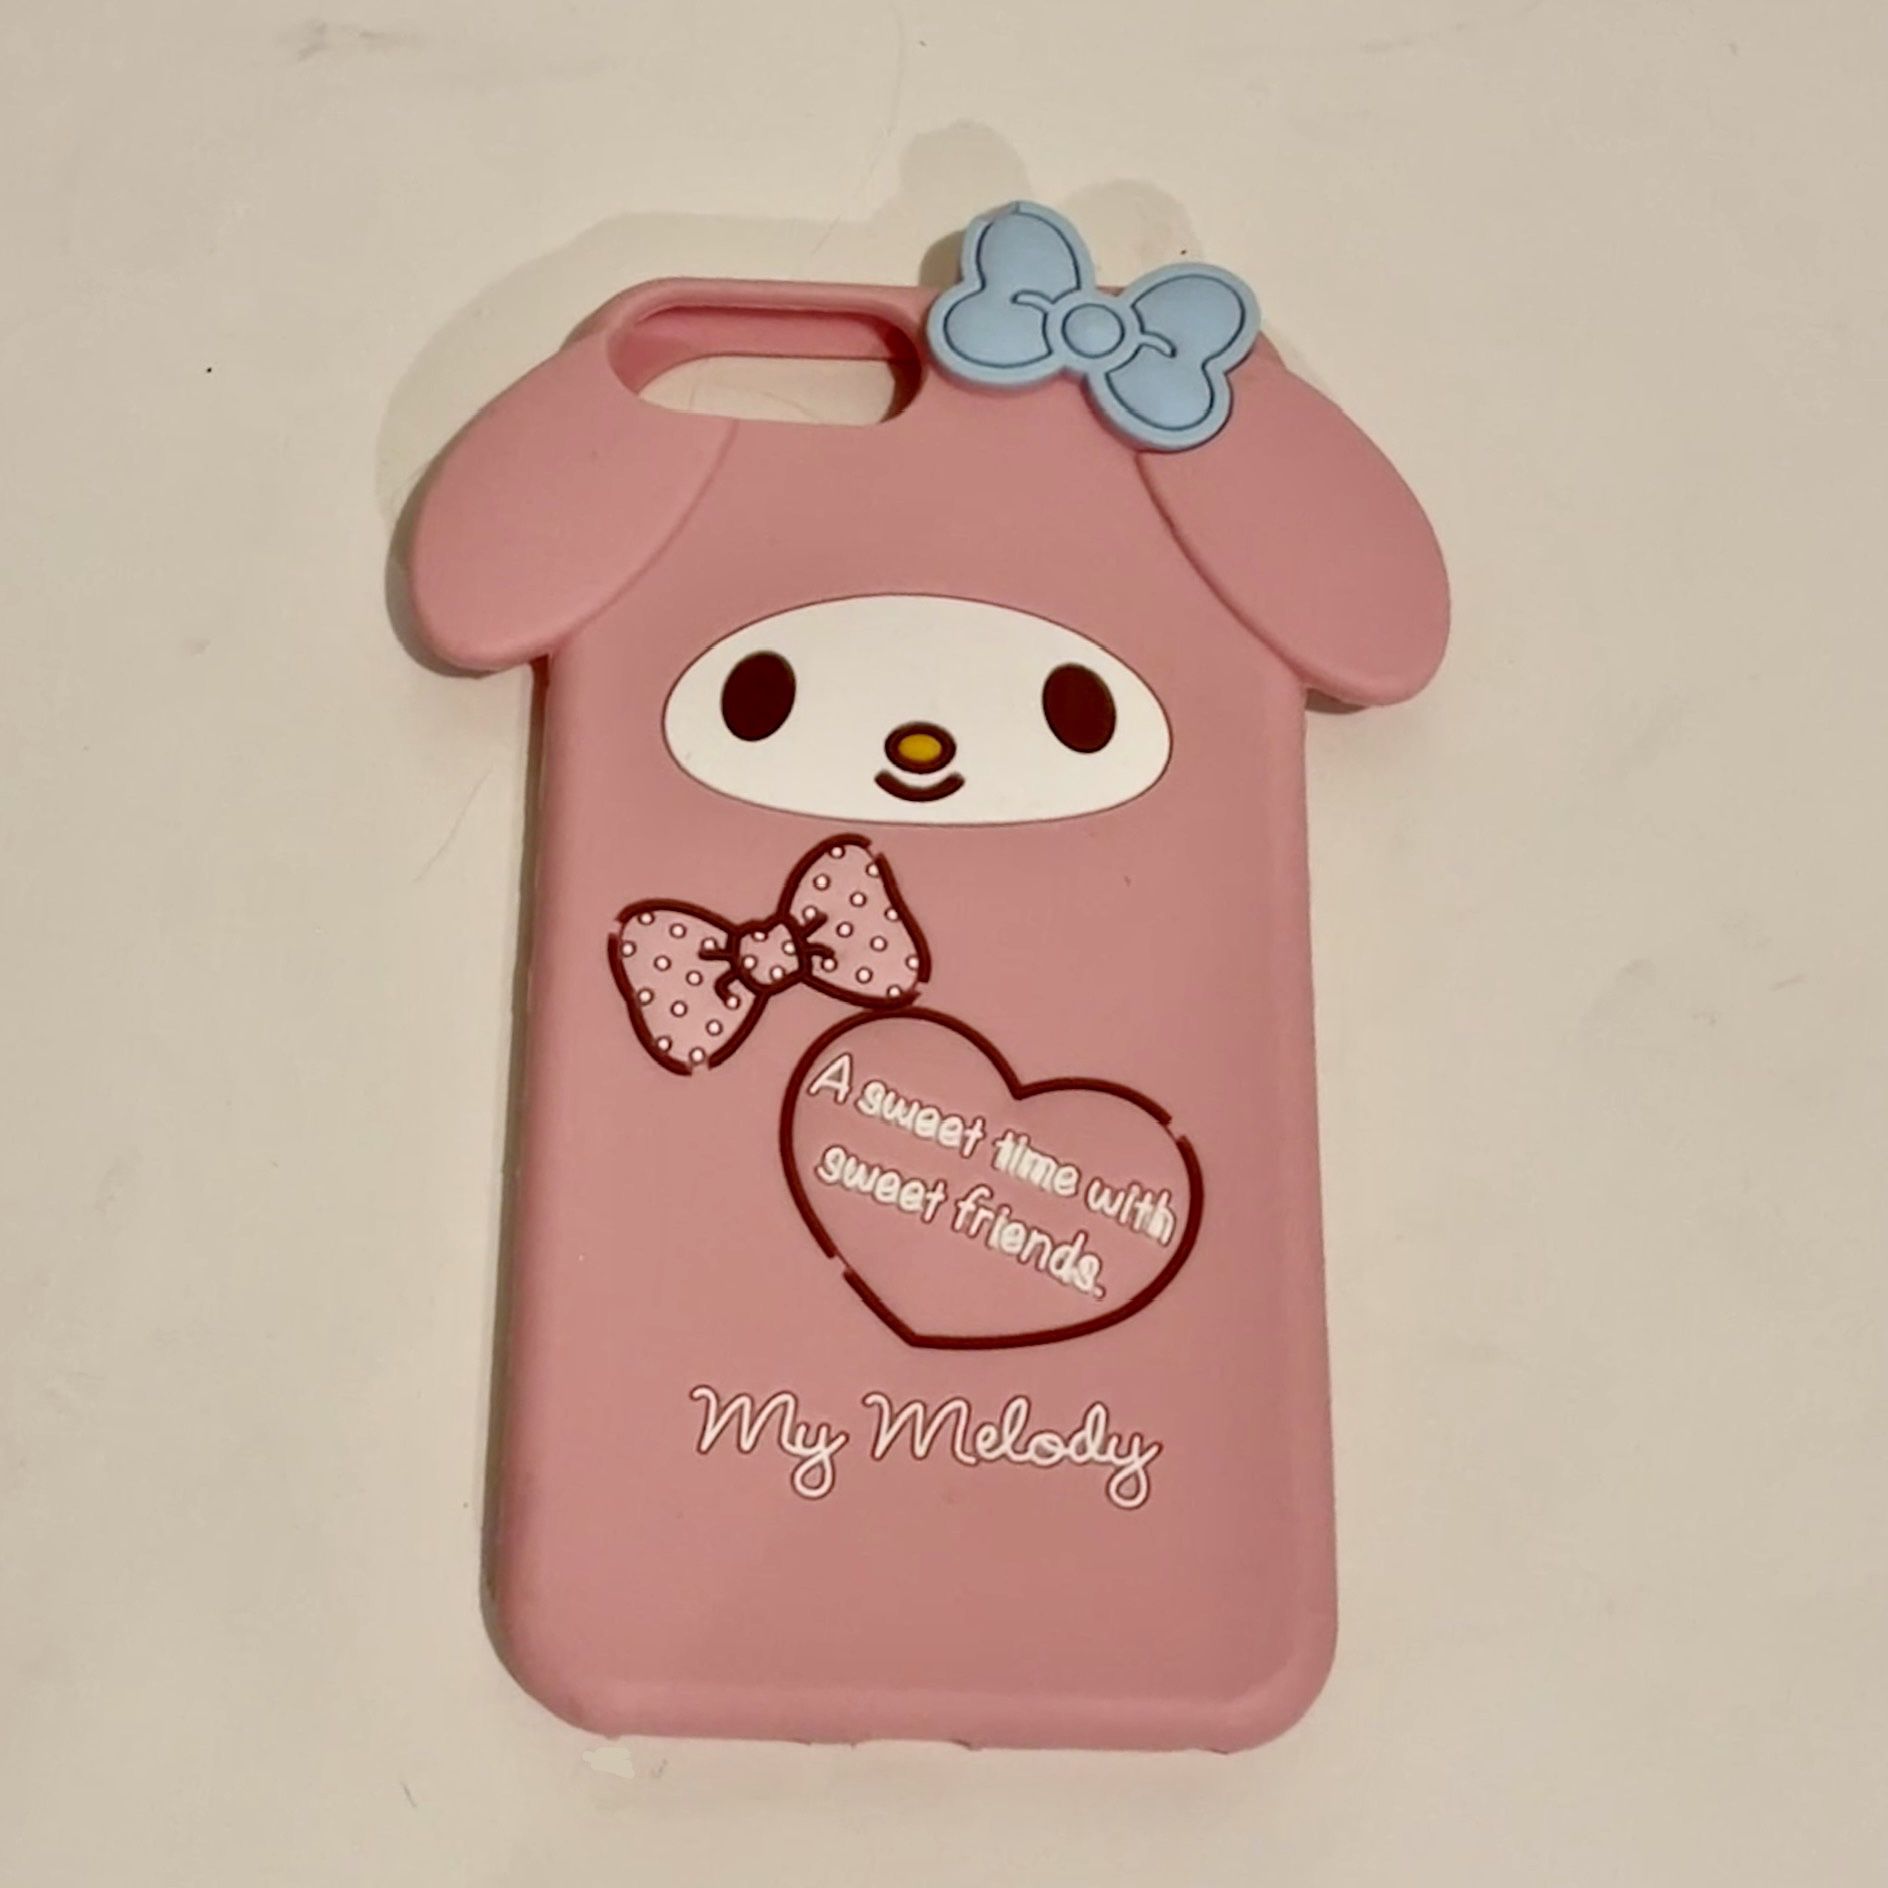 My Melody Iphone 8+ Case Cover Cute Kawaii 